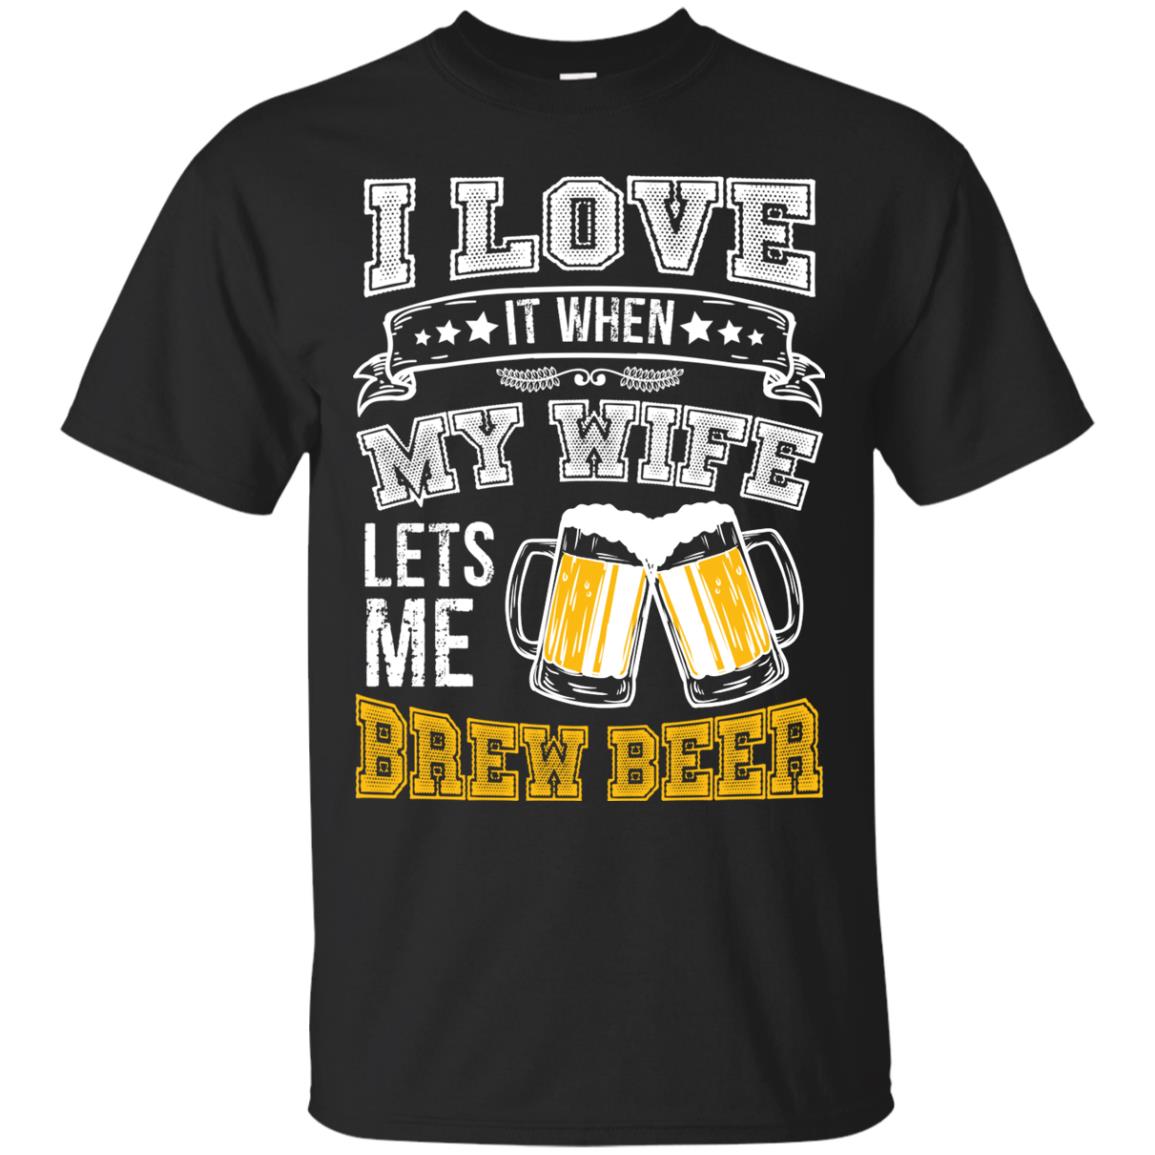 I Love It When My Wife Lets Me Brew Beer Shirt For HusbandG200 Gildan Ultra Cotton T-Shirt